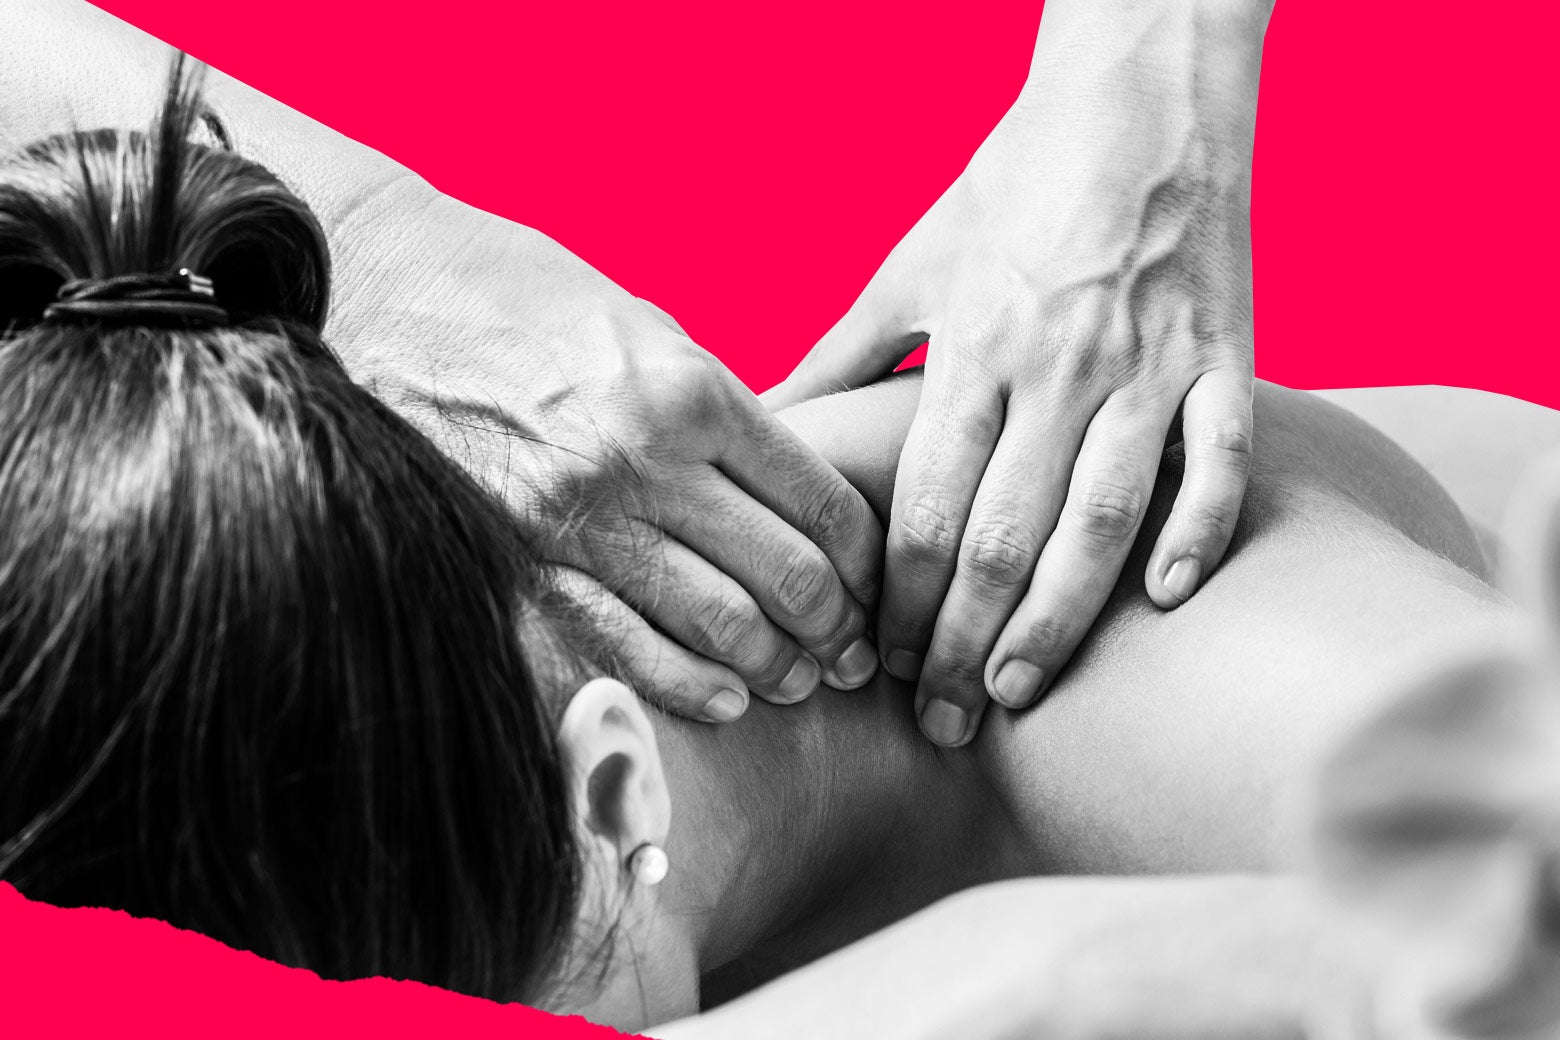 A woman gets her neck massaged, as she worries about a potential resulting orgasm.